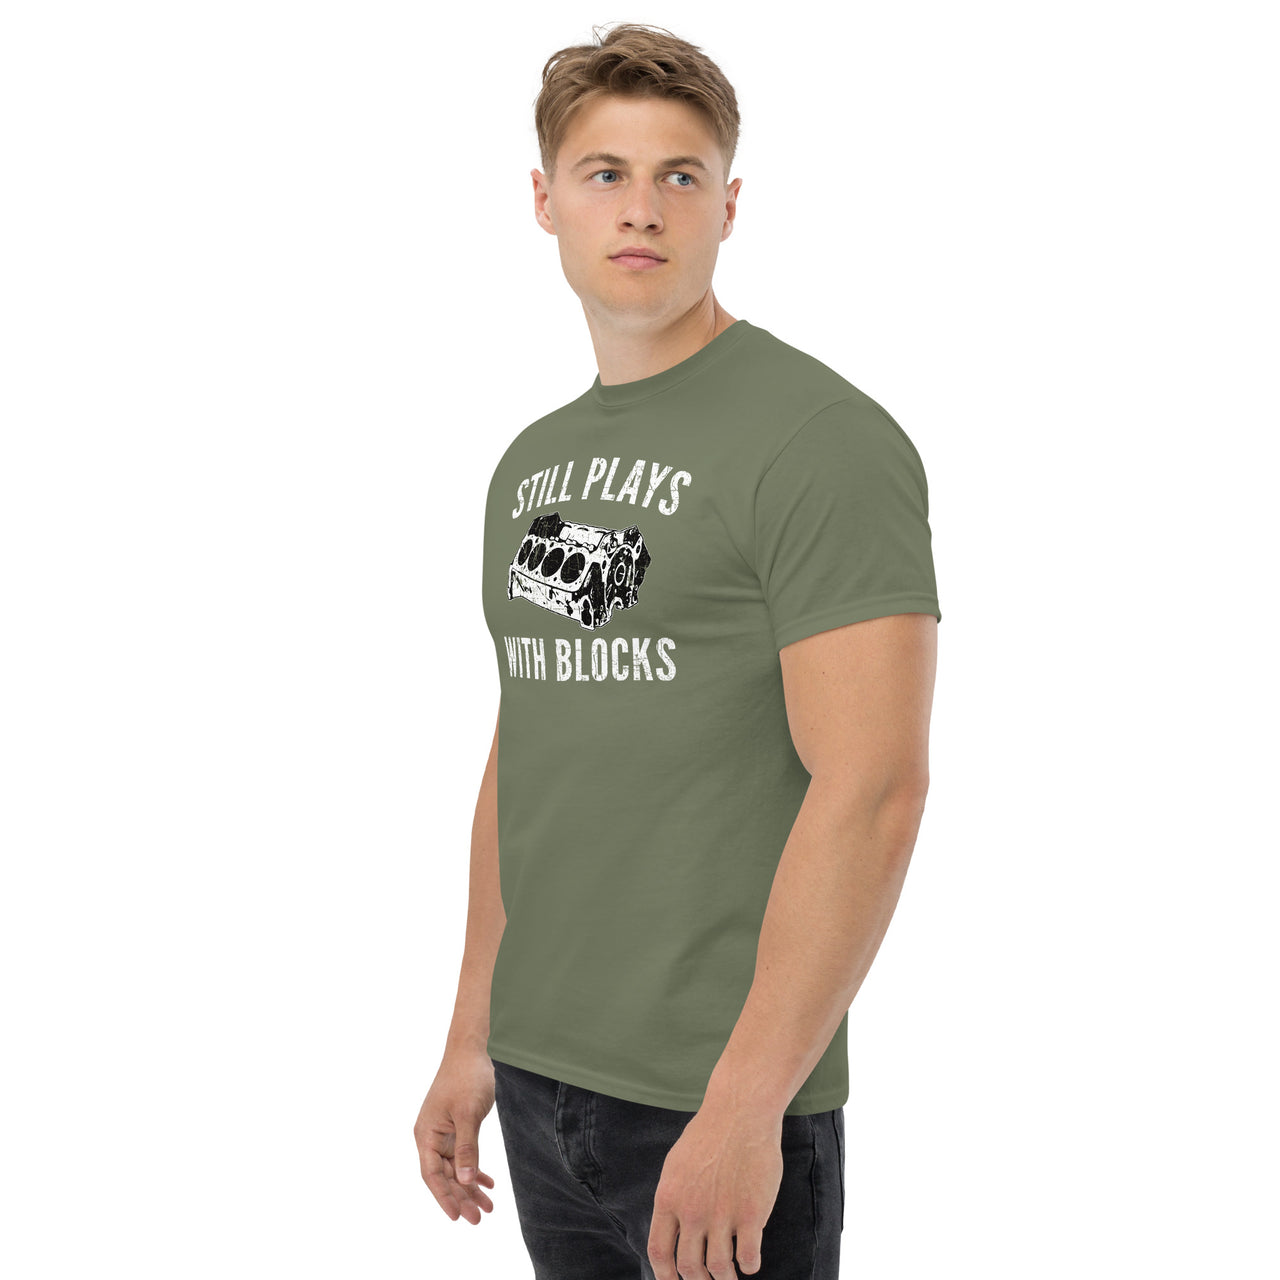 Still Plays With Blocks, Car Enthusiast T-Shirt modeled in green